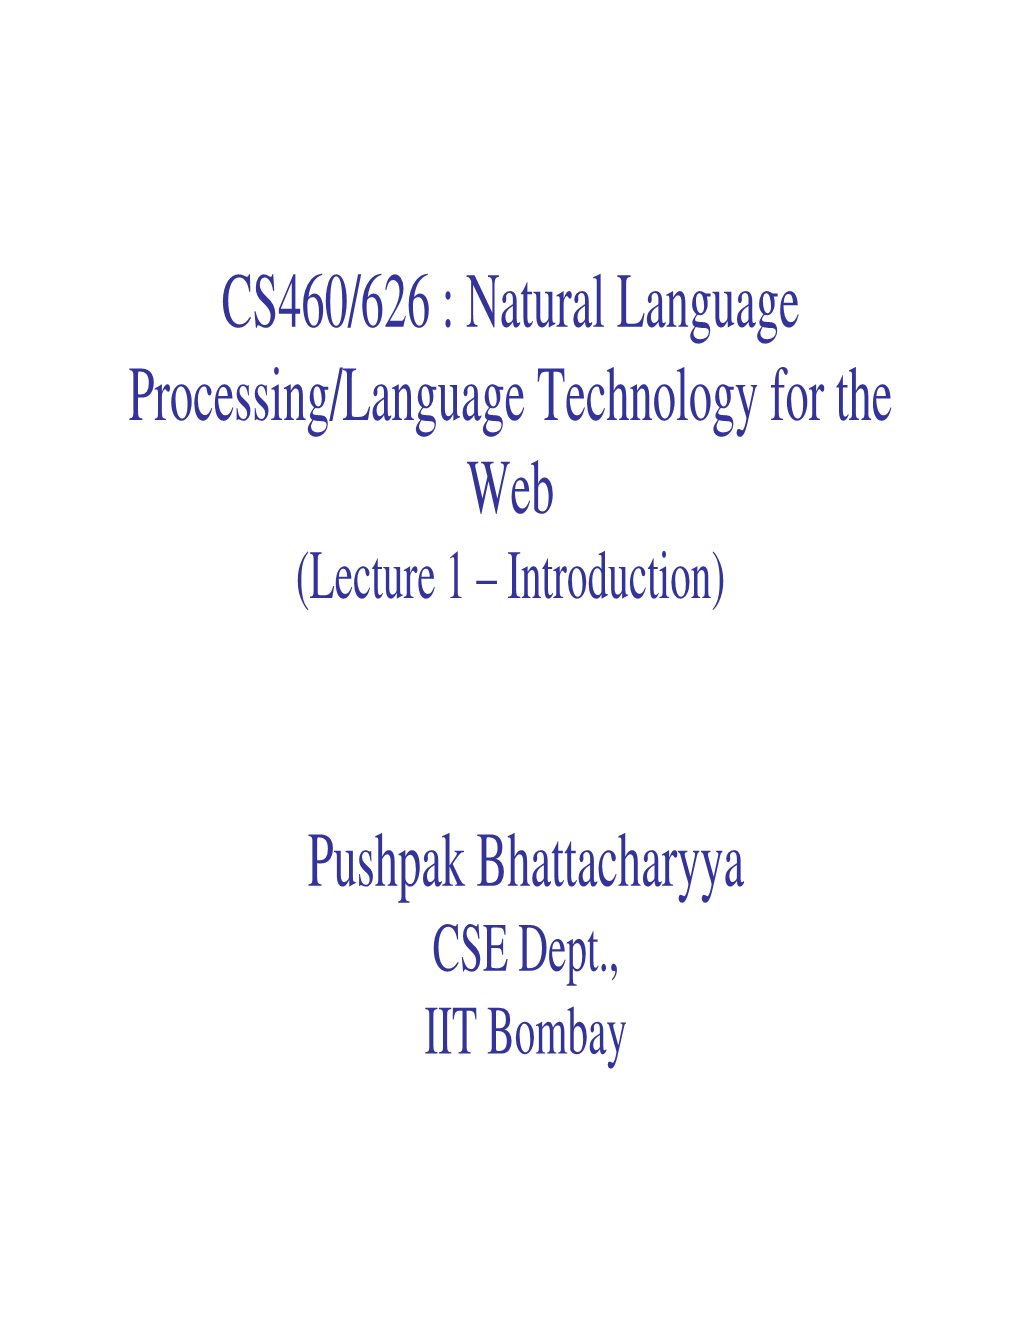 CS460/626 : Natural Language Processing/Language Technology for the Web (Lecture 1 – Introduction)